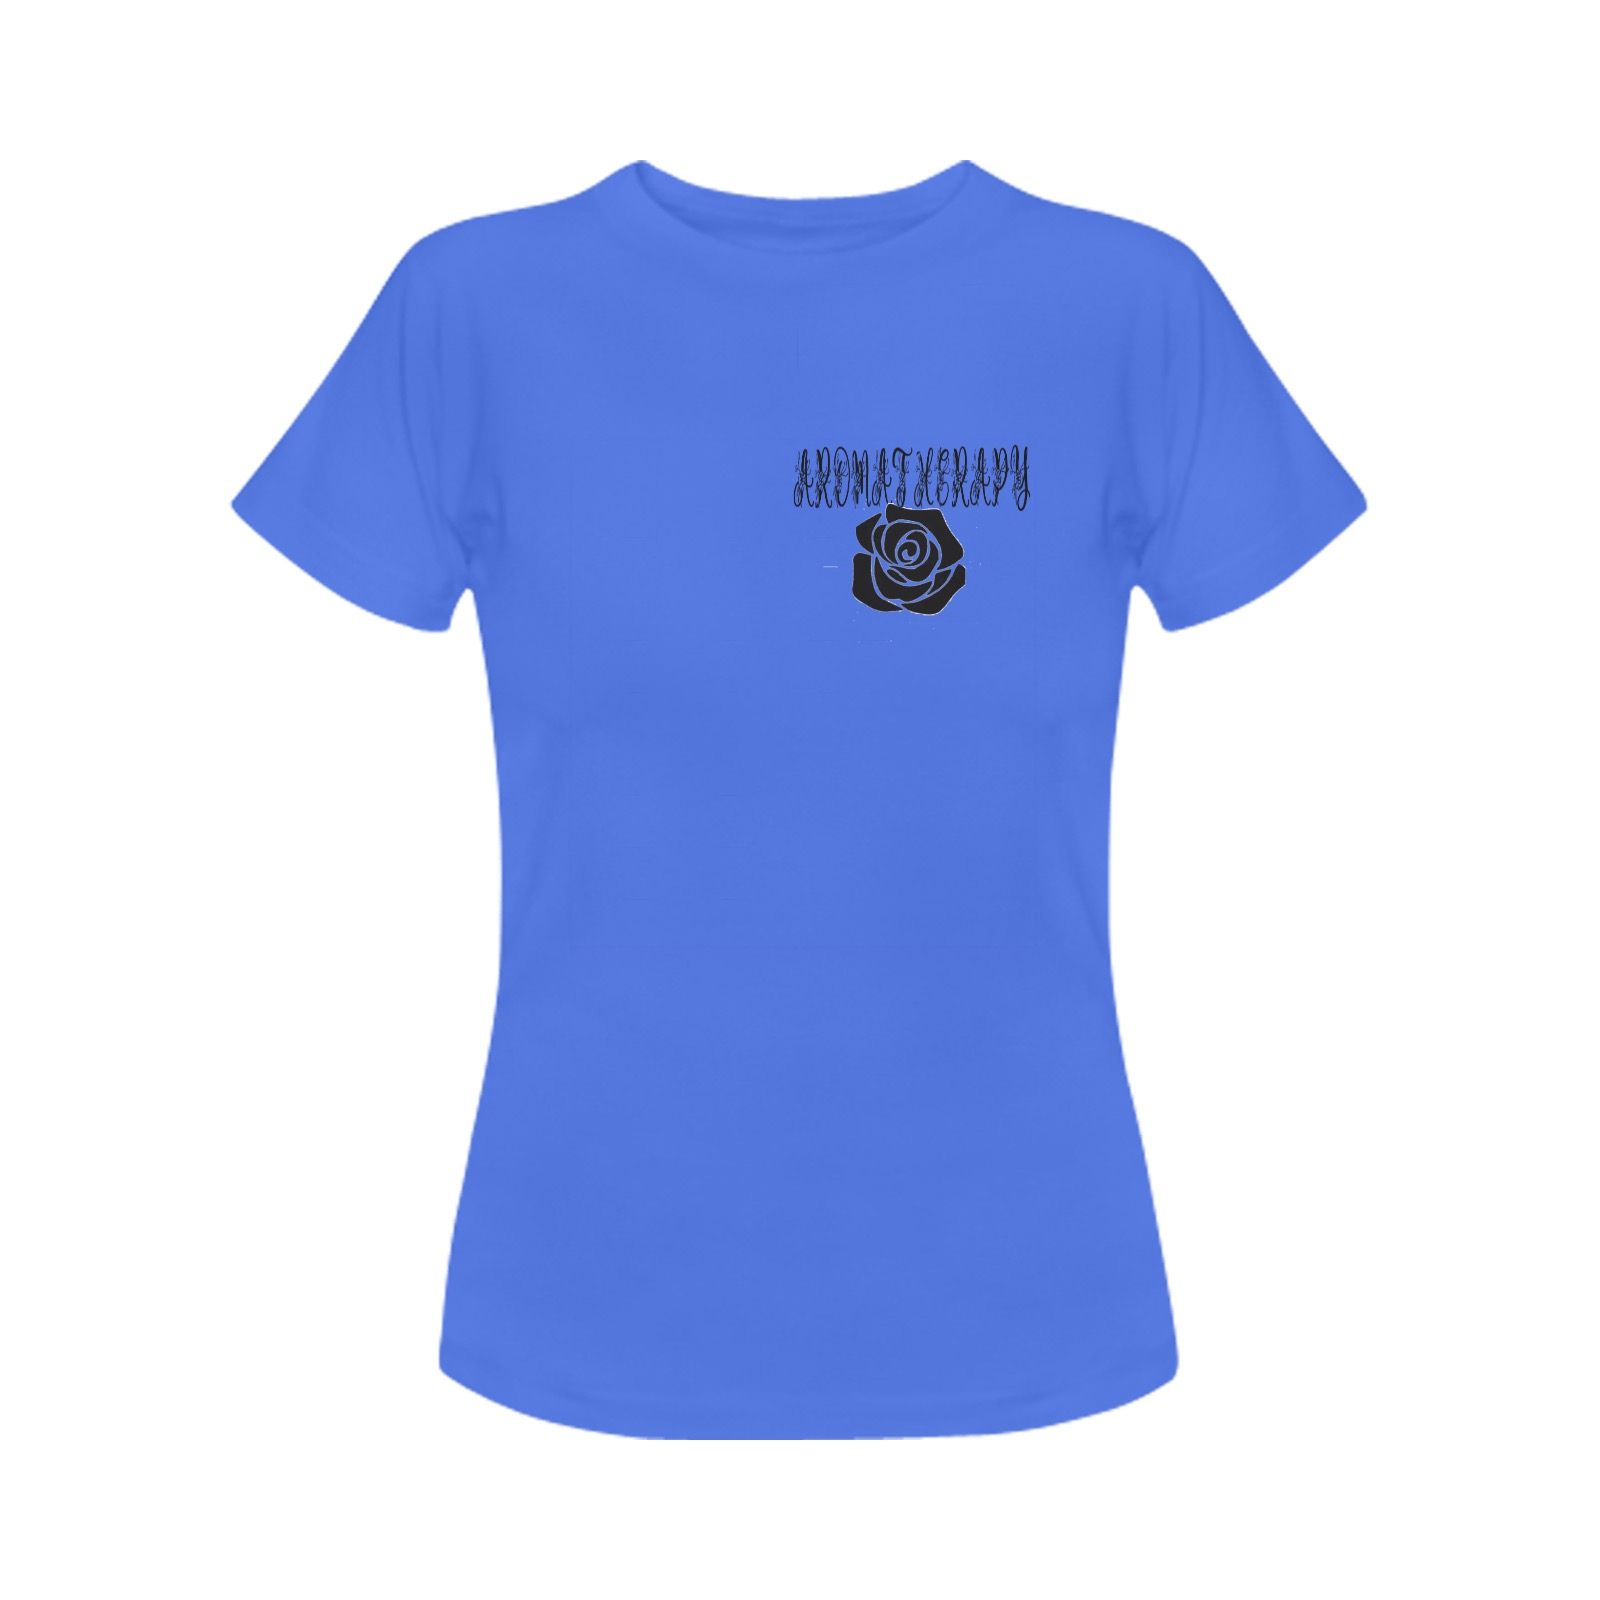 Womens Aromatherapy Apparel Black rose T-Shirt Blue Women's T-Shirt in USA Size (Front Printing Only)